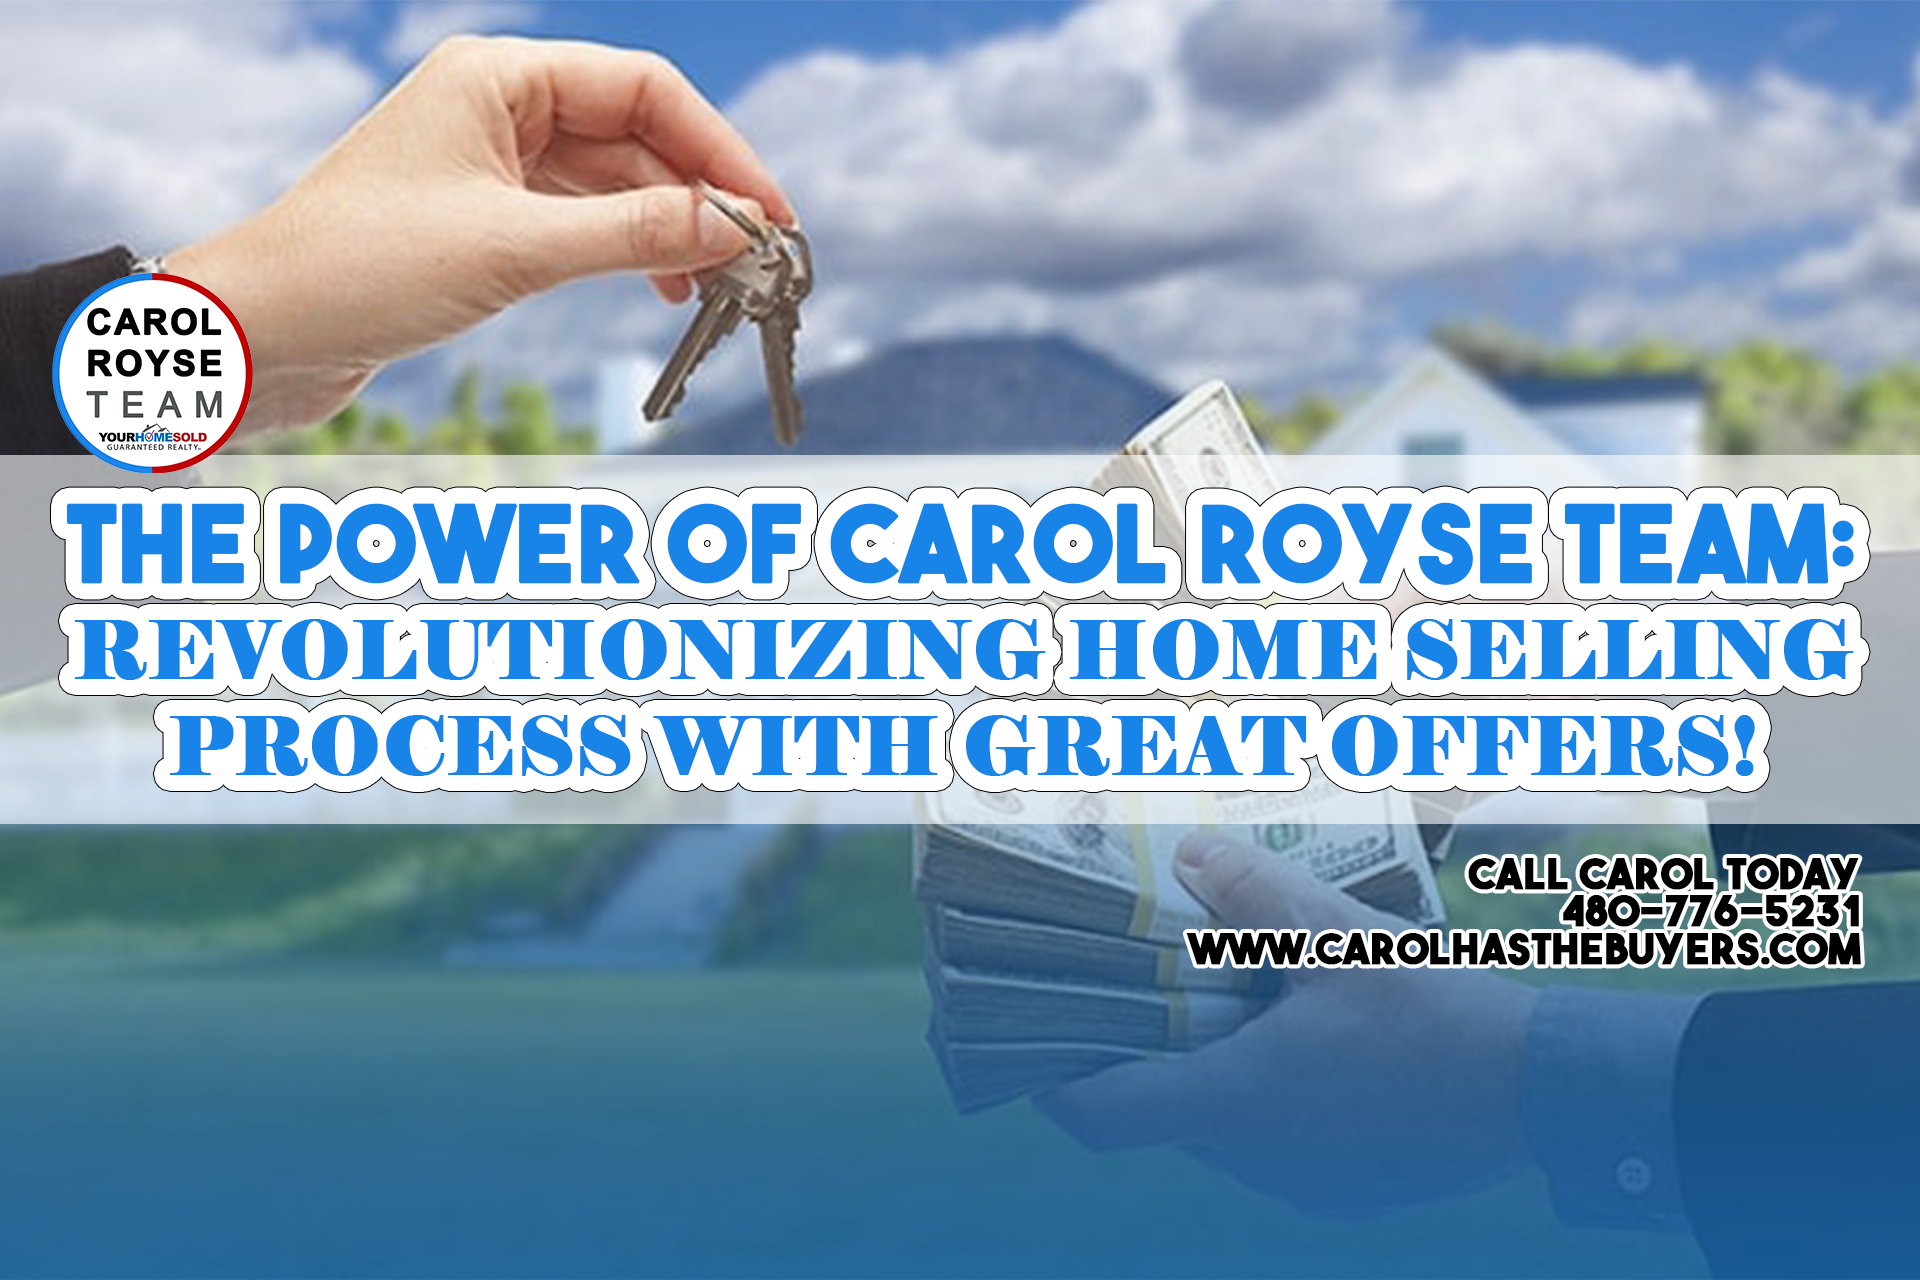 The Power of Carol Royse Team: Revolutionizing Home Selling Process with Great Offers!